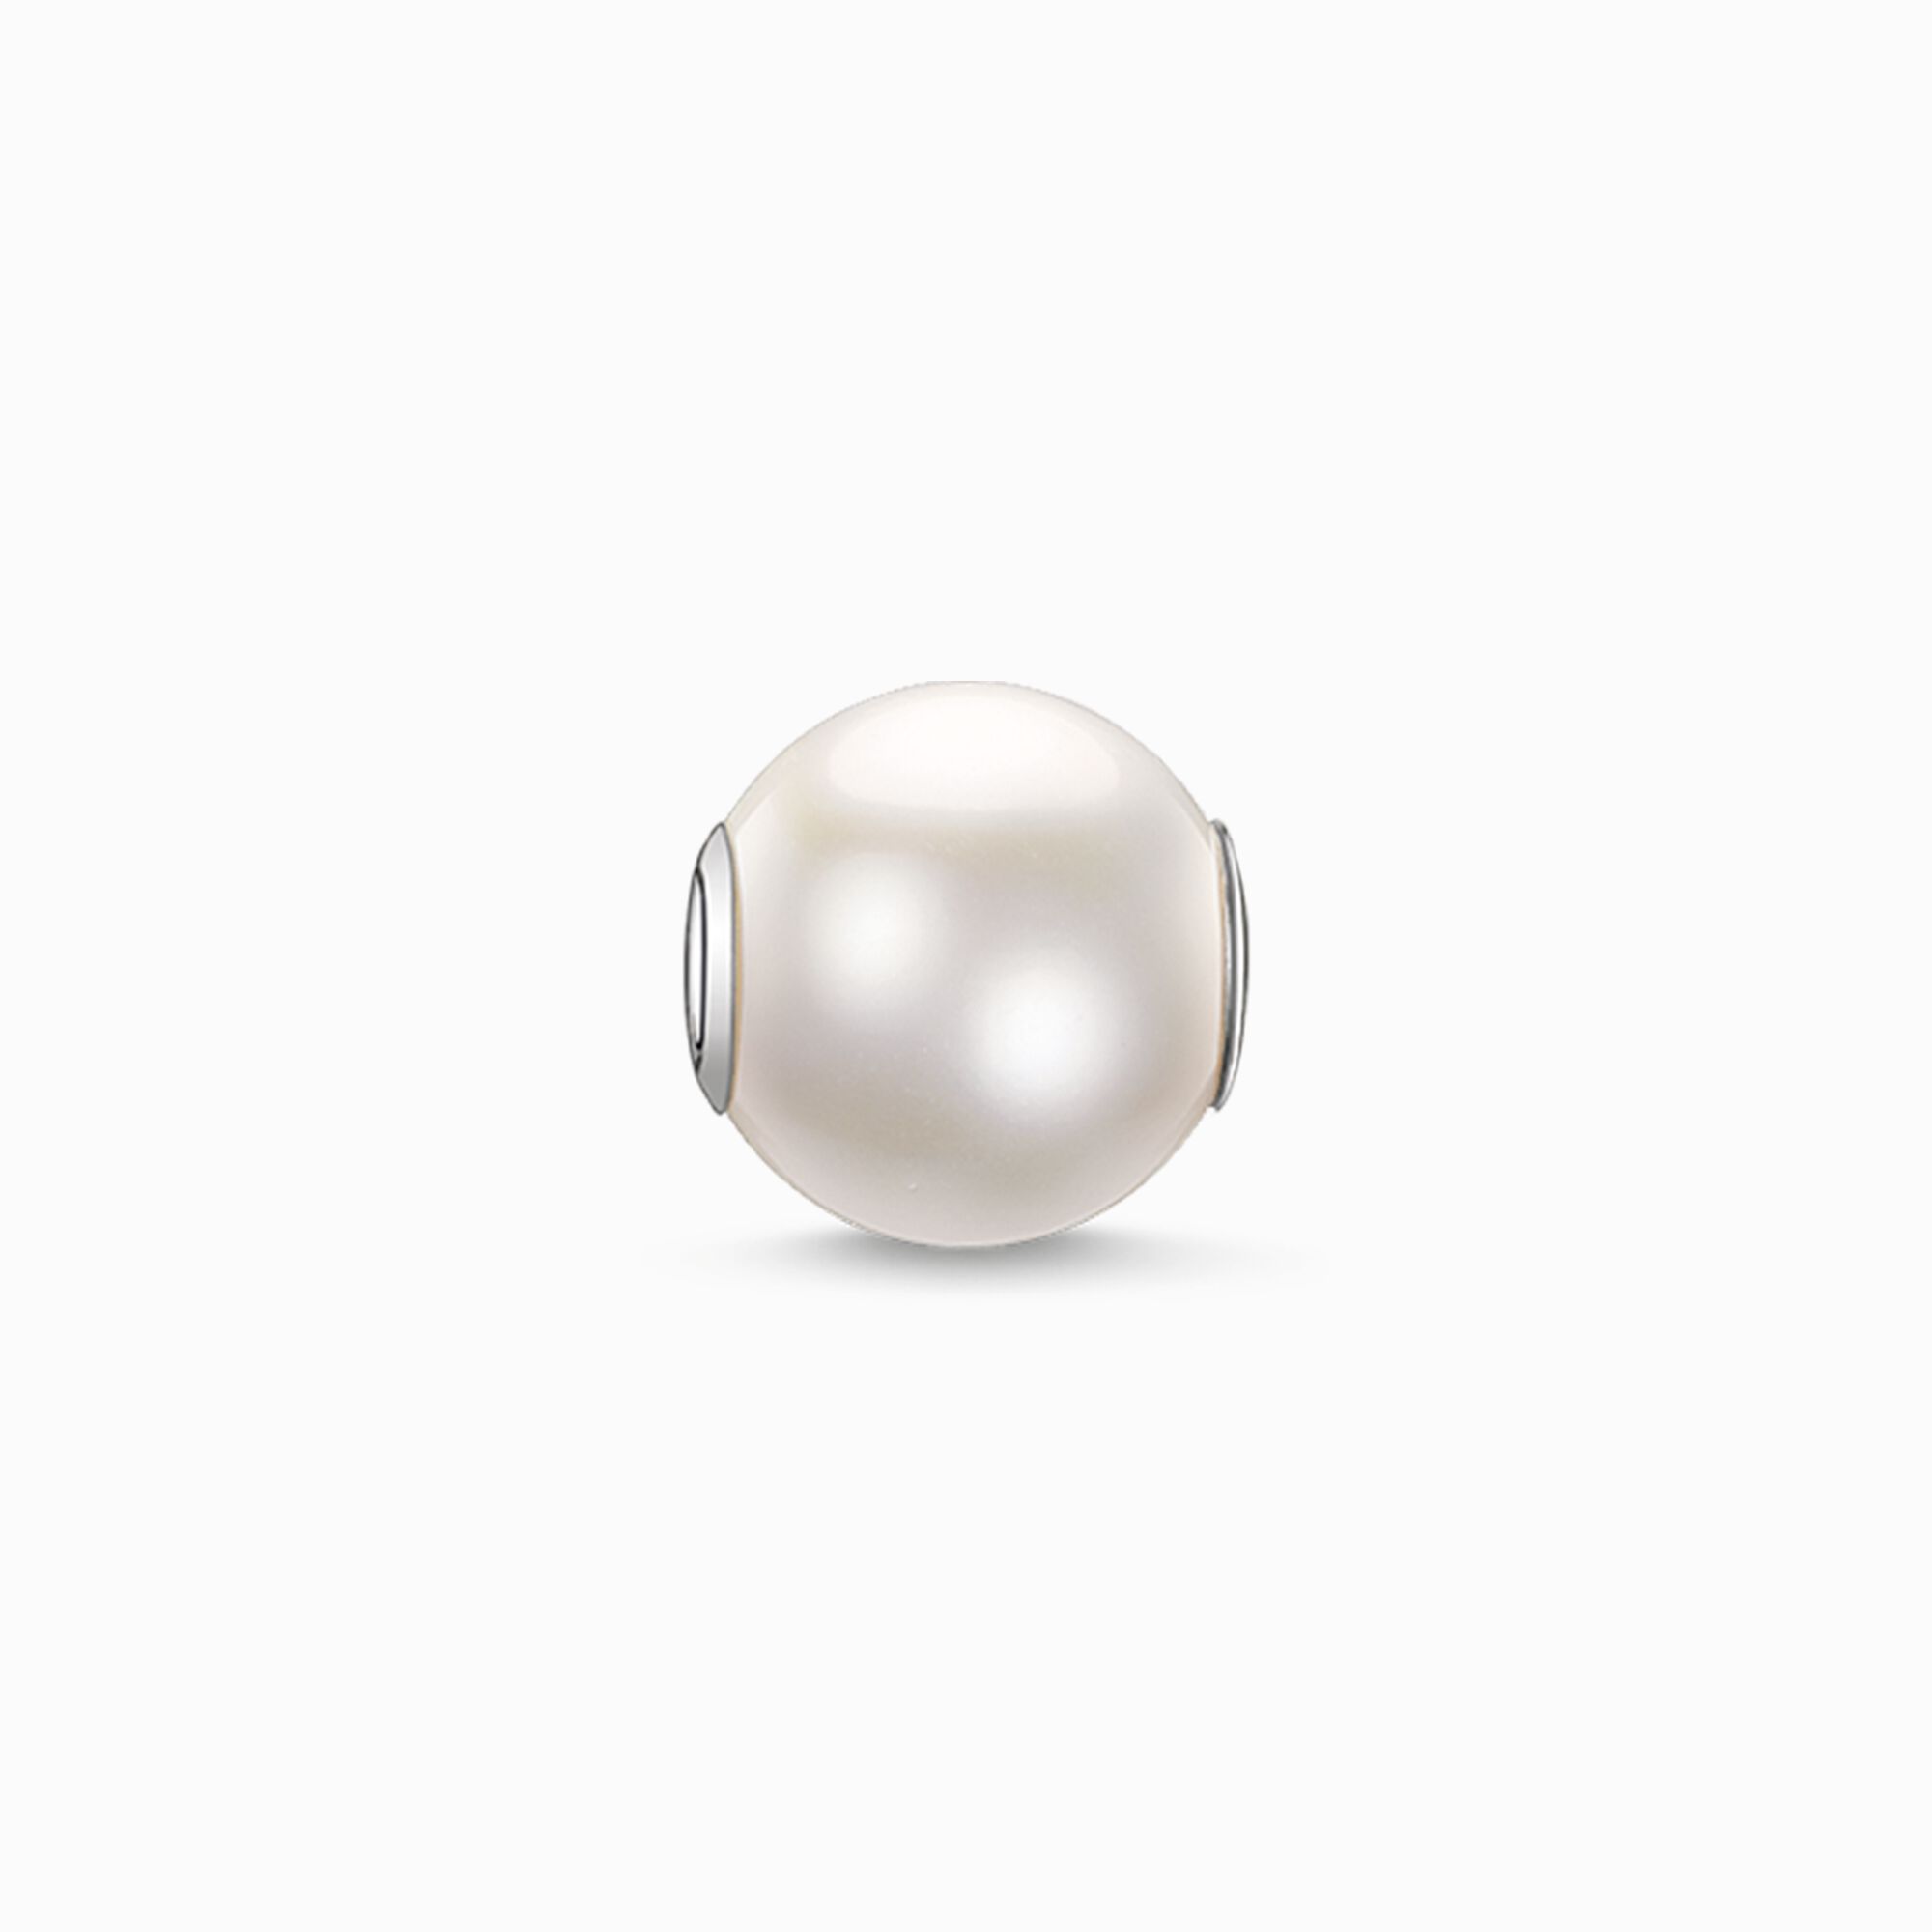 Bead white pearl large from the Karma Beads collection in the THOMAS SABO online store